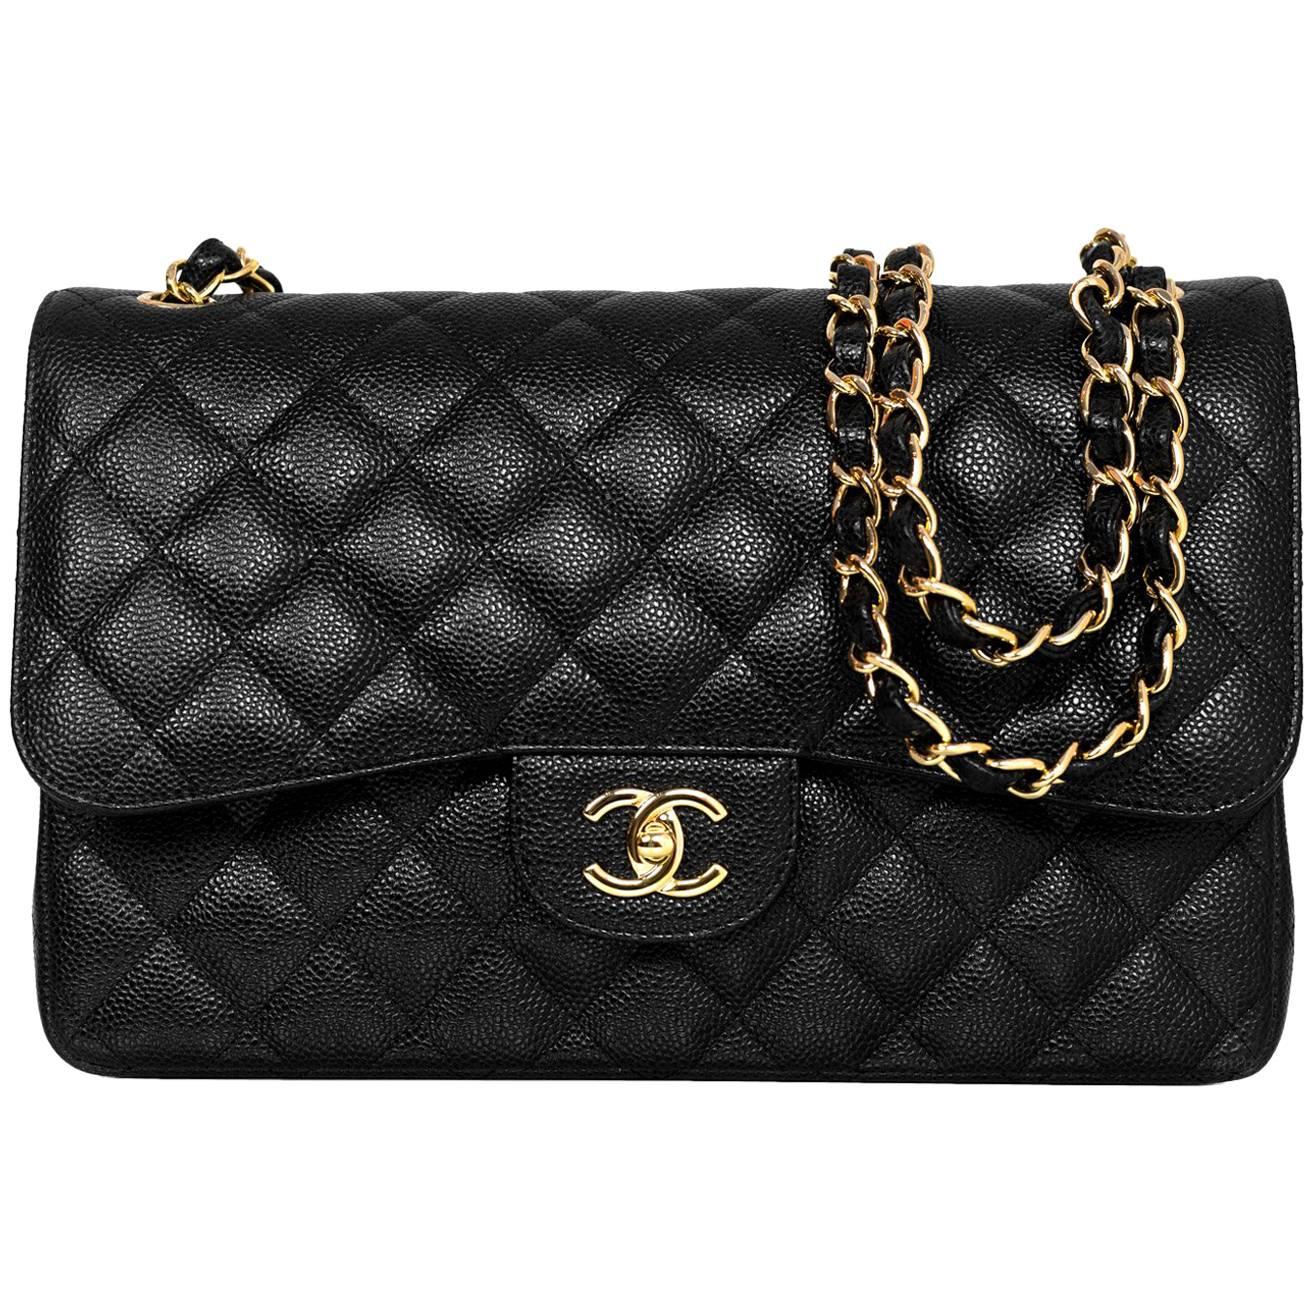 Chanel 2017 Black Quilted Caviar Leather Jumbo Double Flap Bag w/ Box/Card/DB